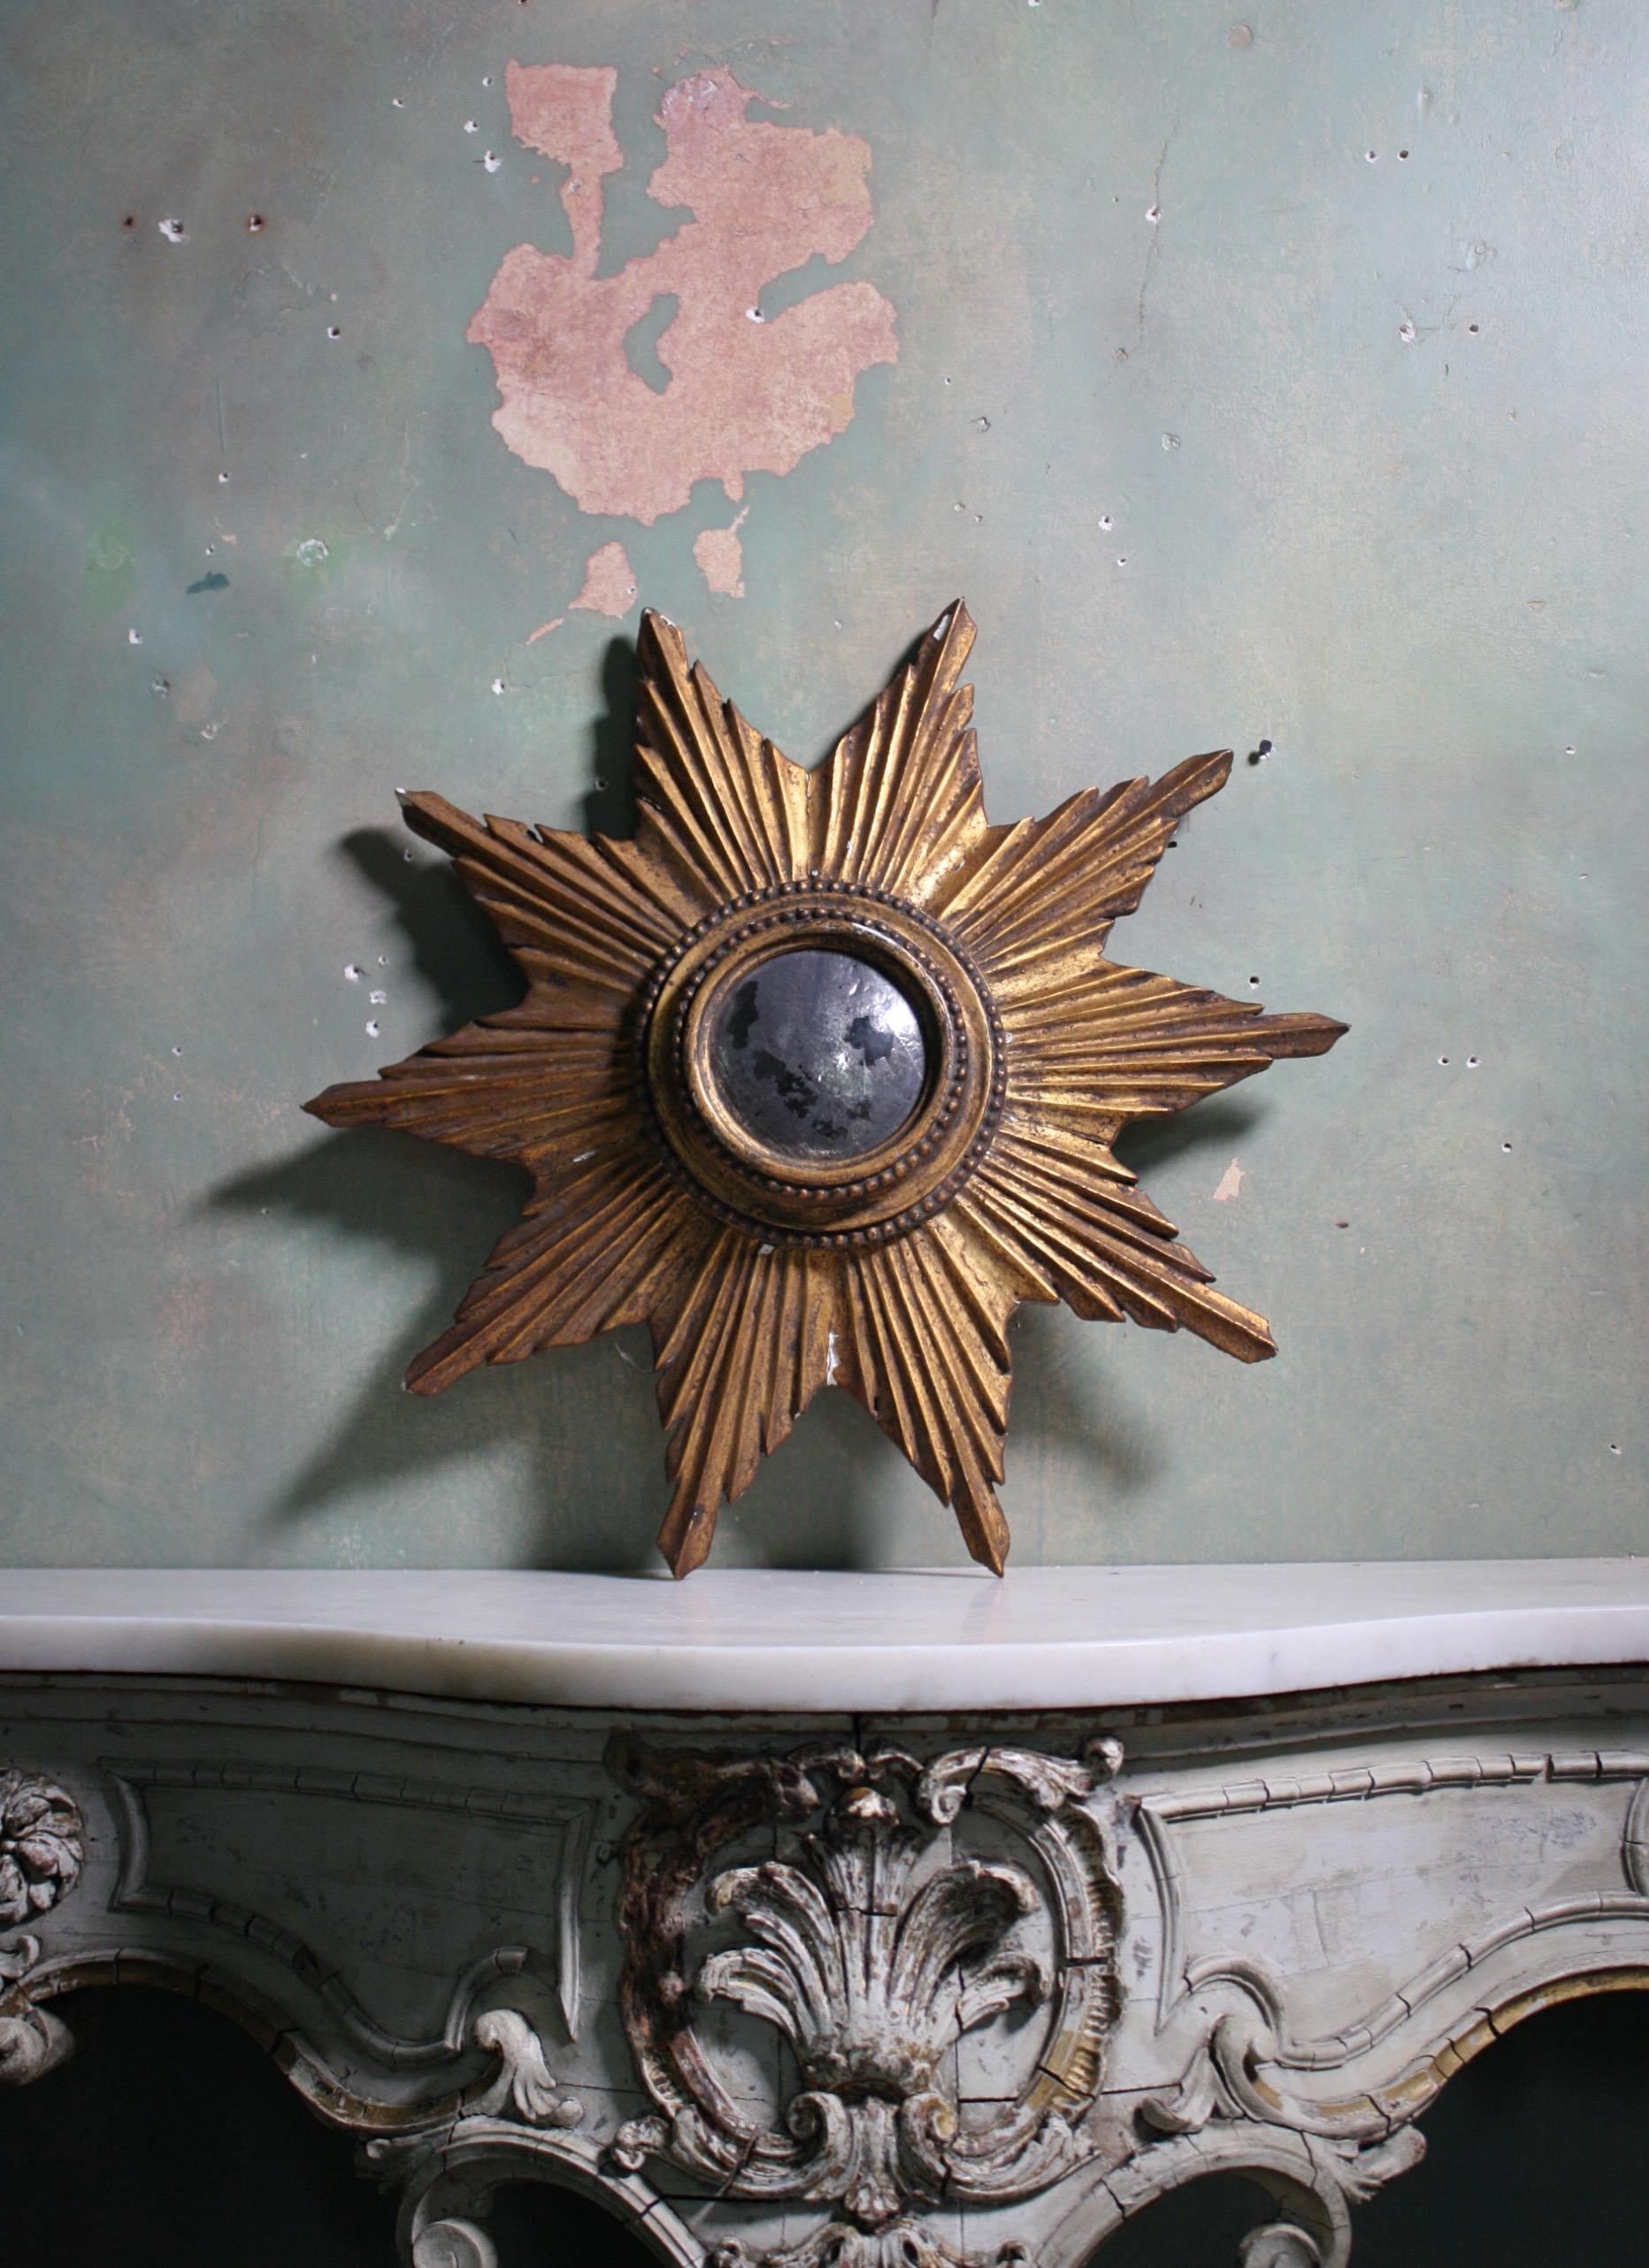 A beautiful and untouched early 20th century sun burst mirror, with a heavily oxidized circular convex mirror.

The gilt gesso work has age related wear and discoloration, some small sections of loss.

European in origin, likely to be